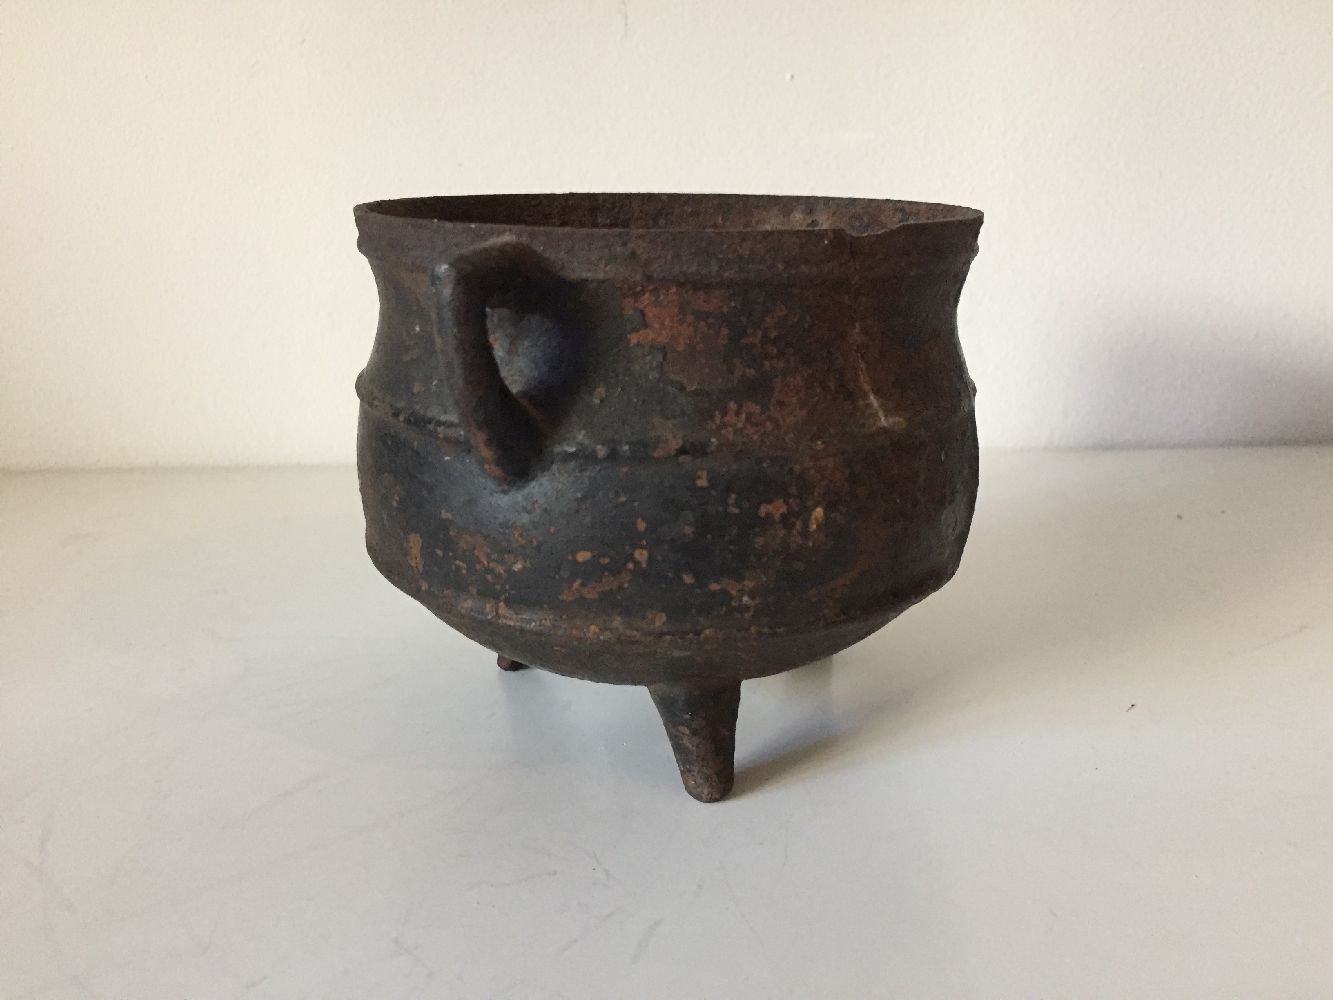 A Chinese iron cauldron form censer, 16th century, with two angular handles, the body decorated with - Image 3 of 6